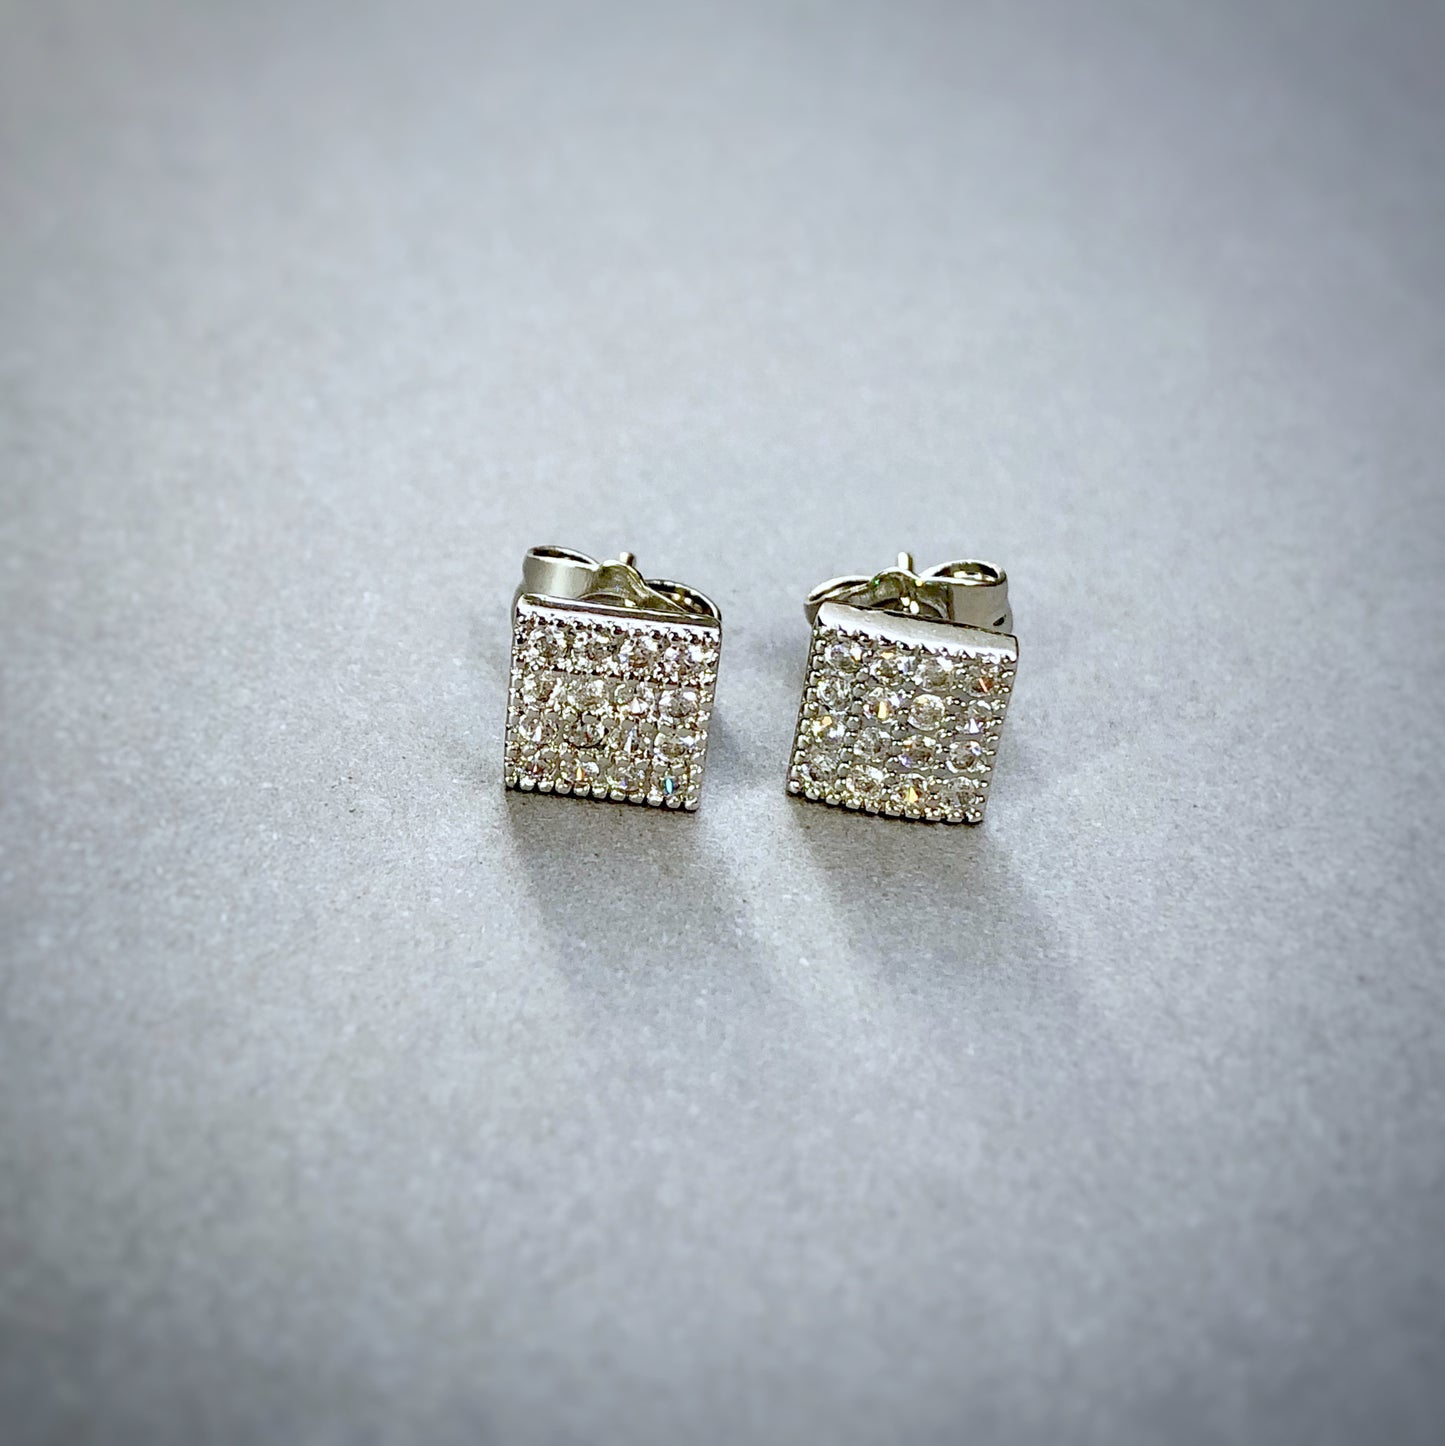 The Simple Square Stud